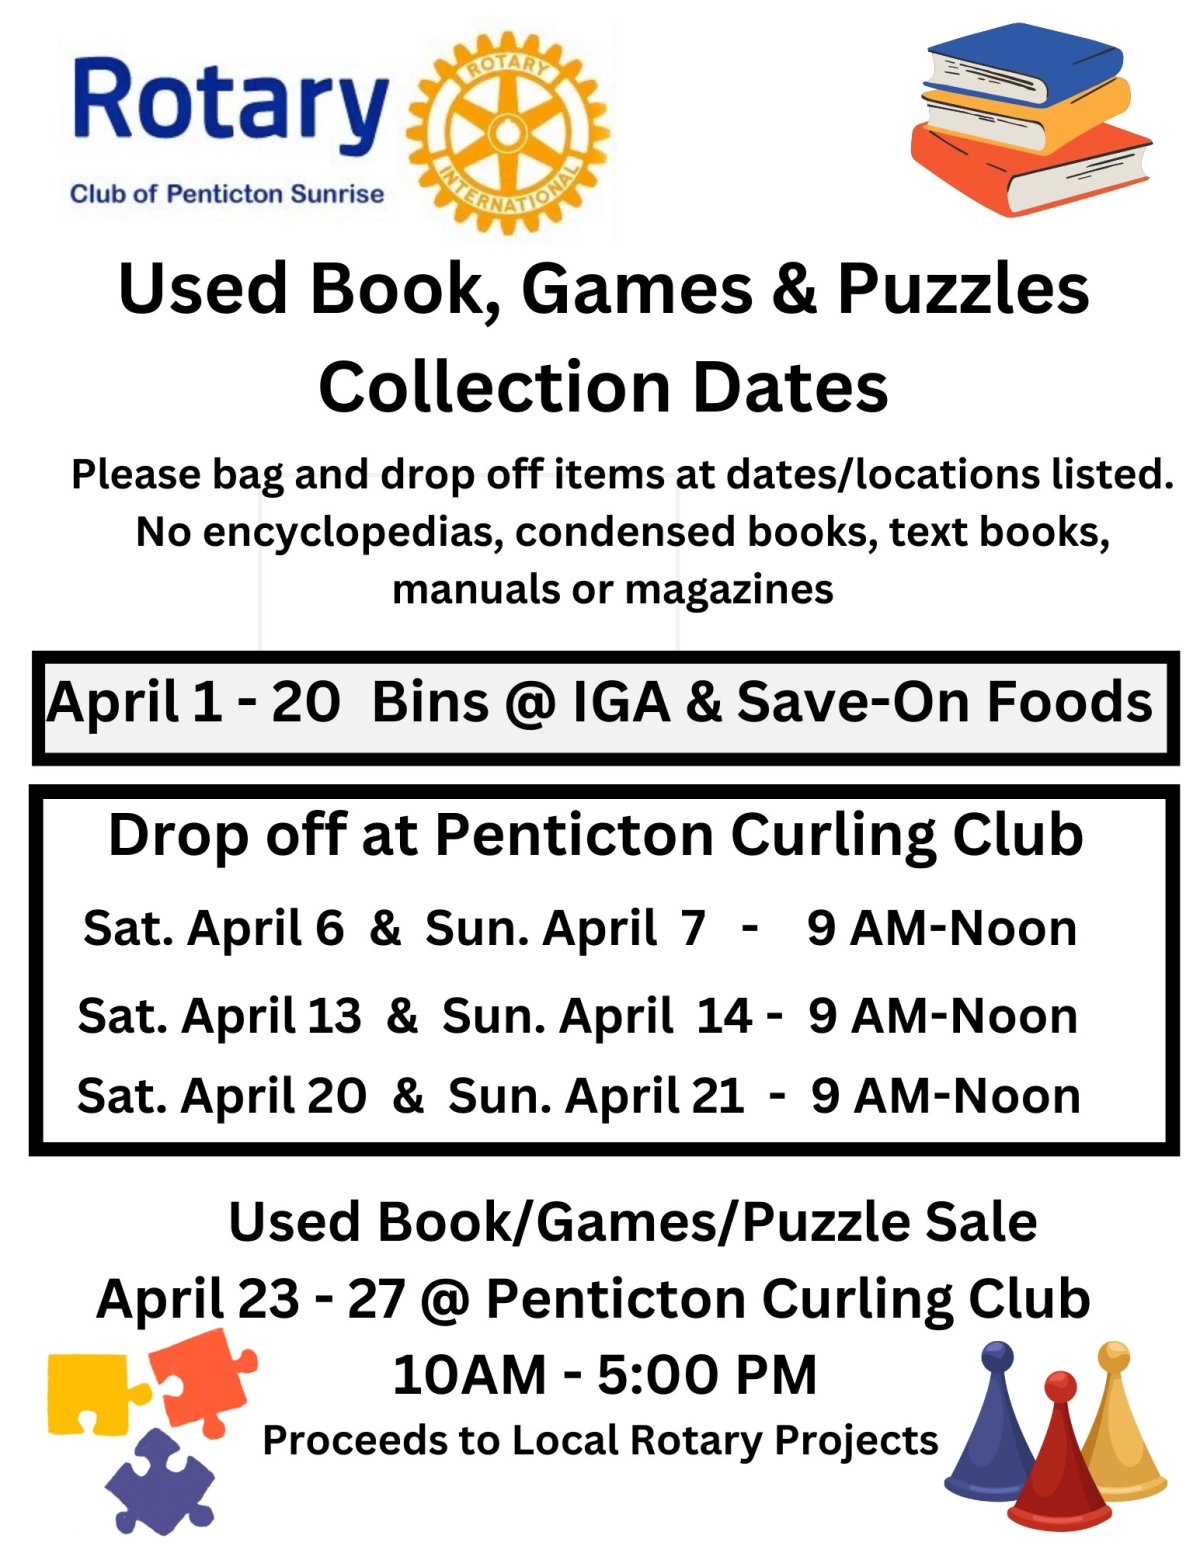 Rotary Club of Penticton Sunrise Used Books, Games and Puzzles Sale - image